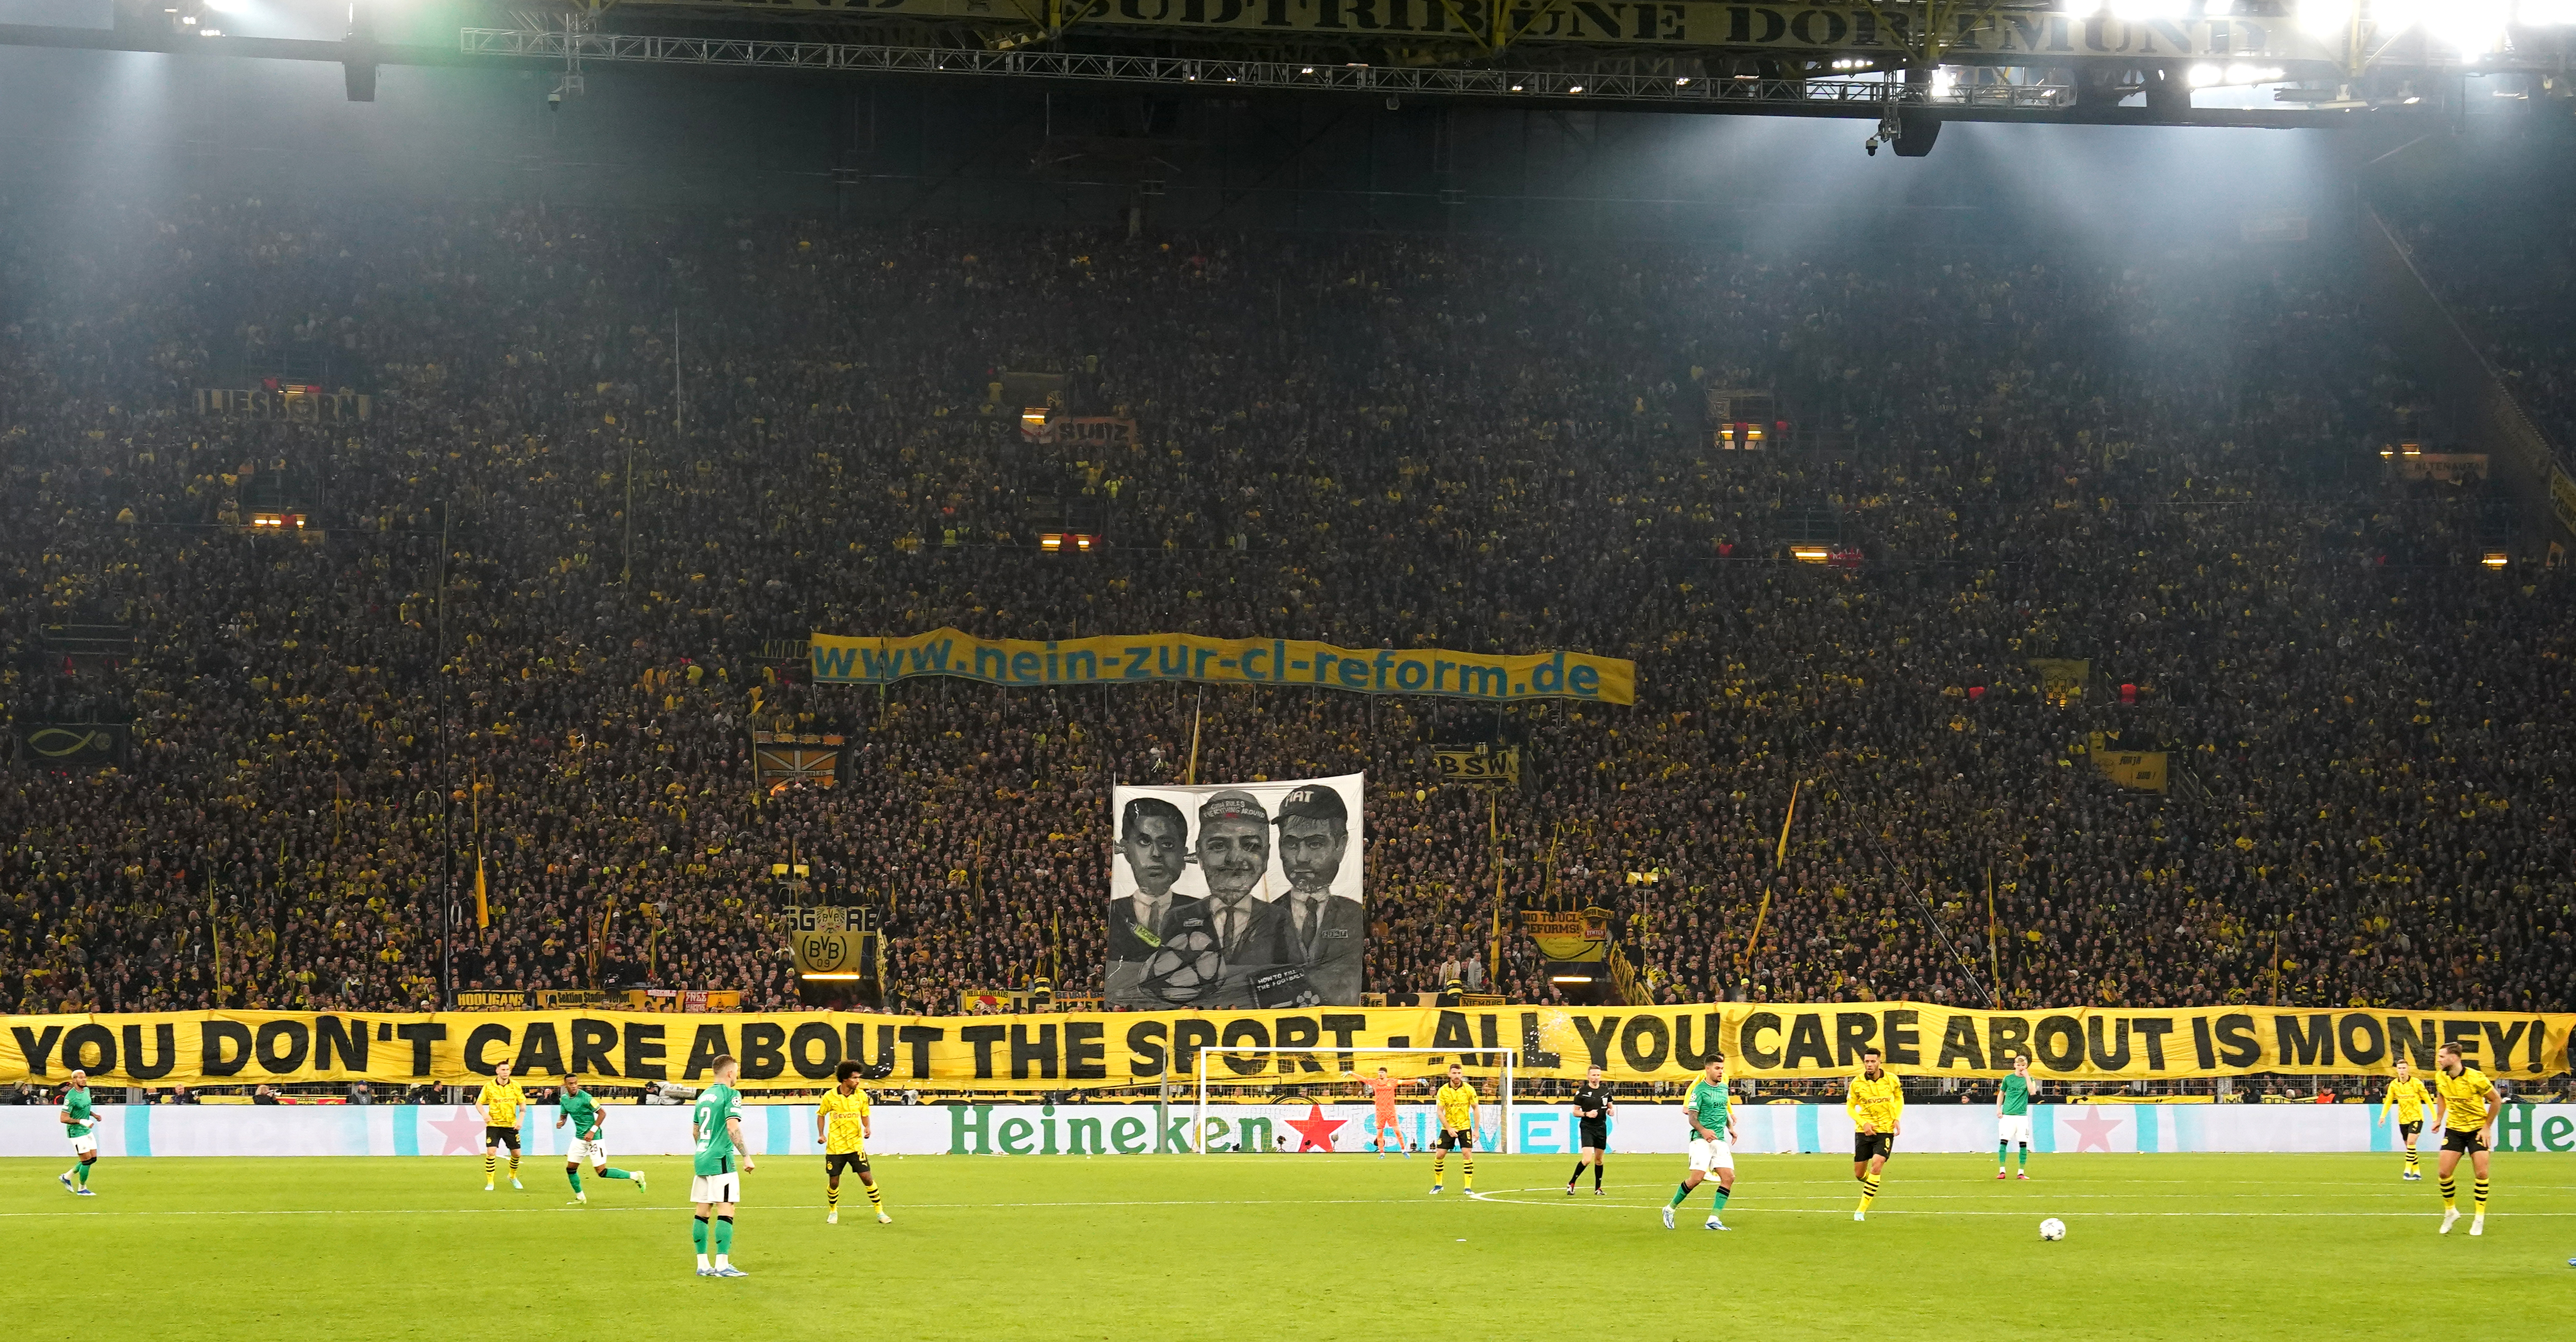 Dortmund's fans criticise FIFA and the Agnelli family